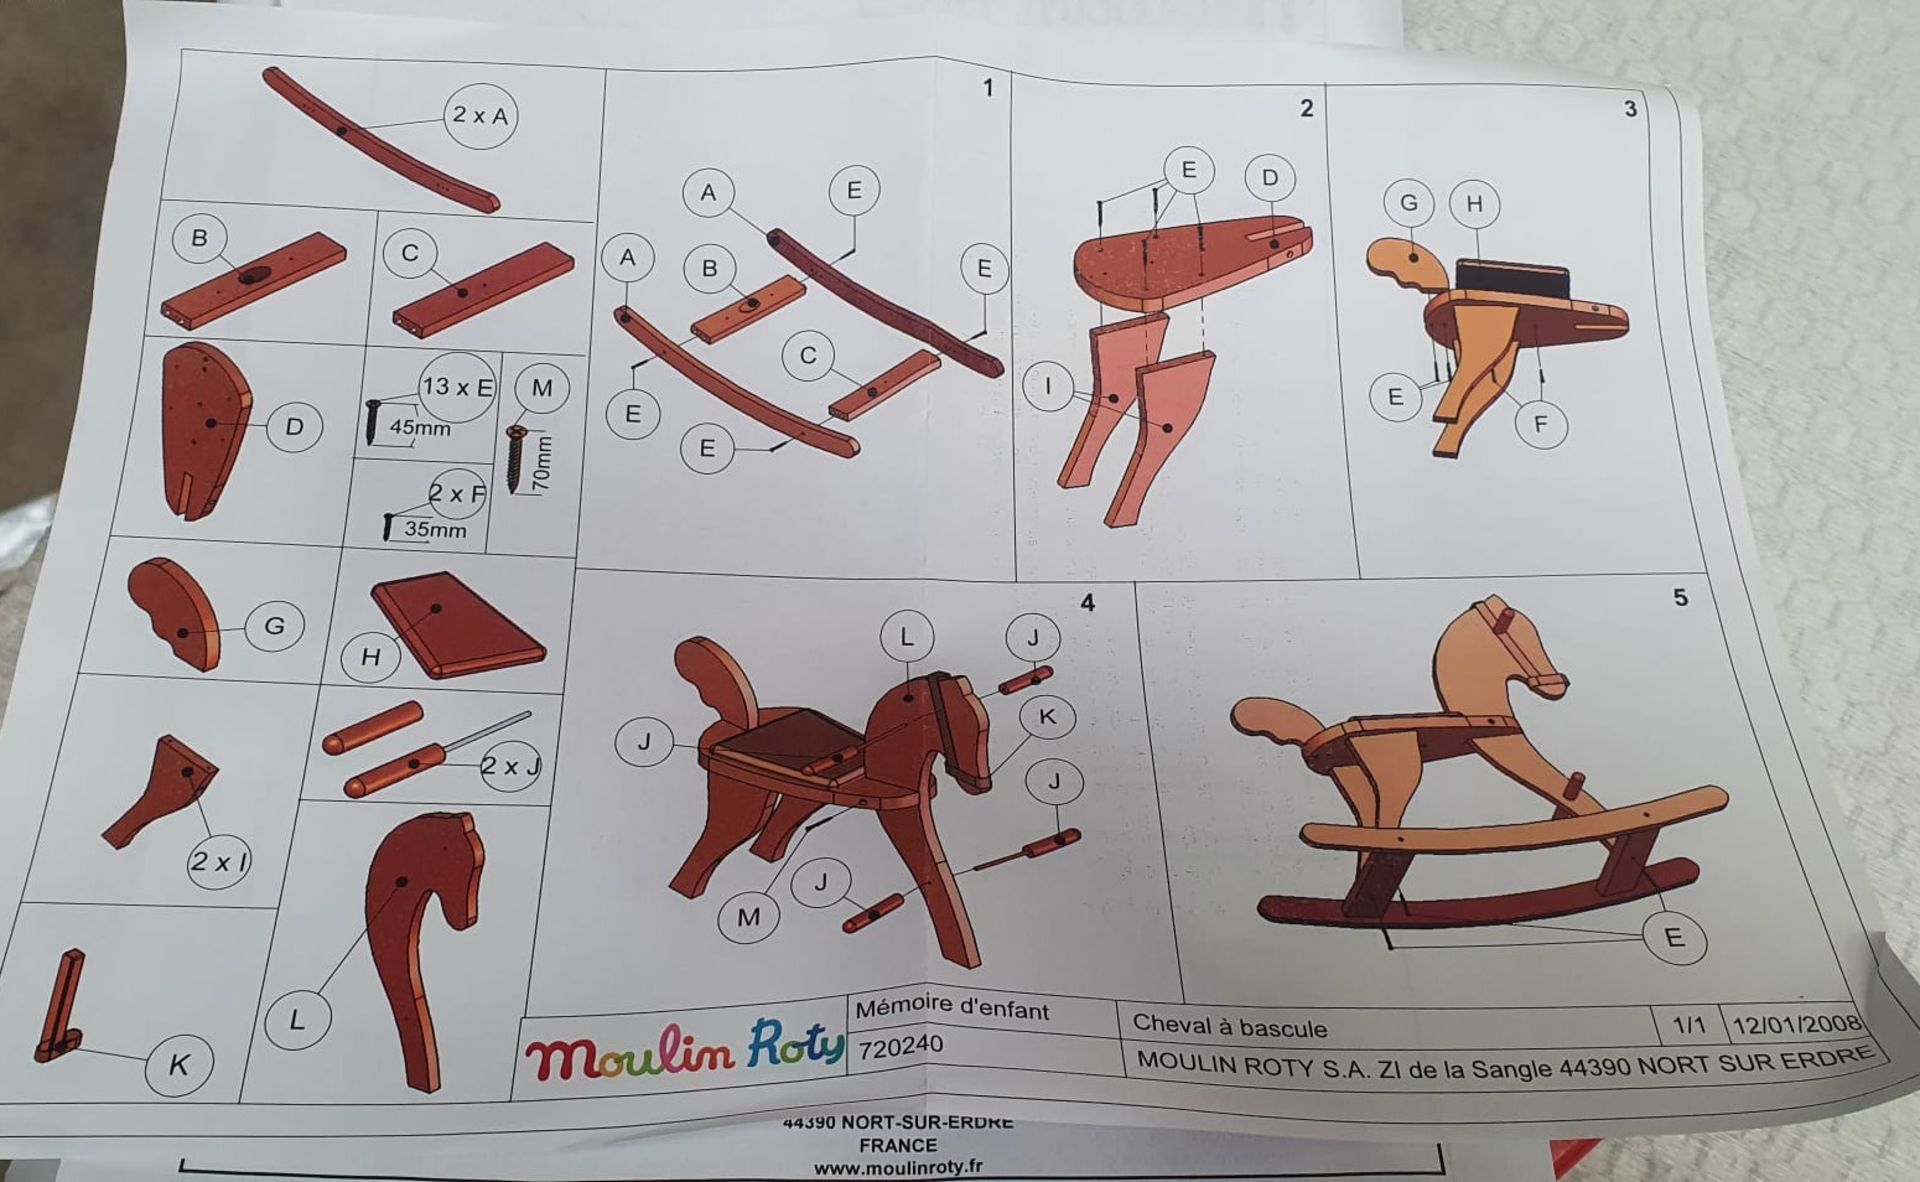 1 x MOULIN ROTY Luxury Wooden Rocking Horse - Original Price £129.00 - Unused Boxed Stock - Ref: - Image 3 of 5